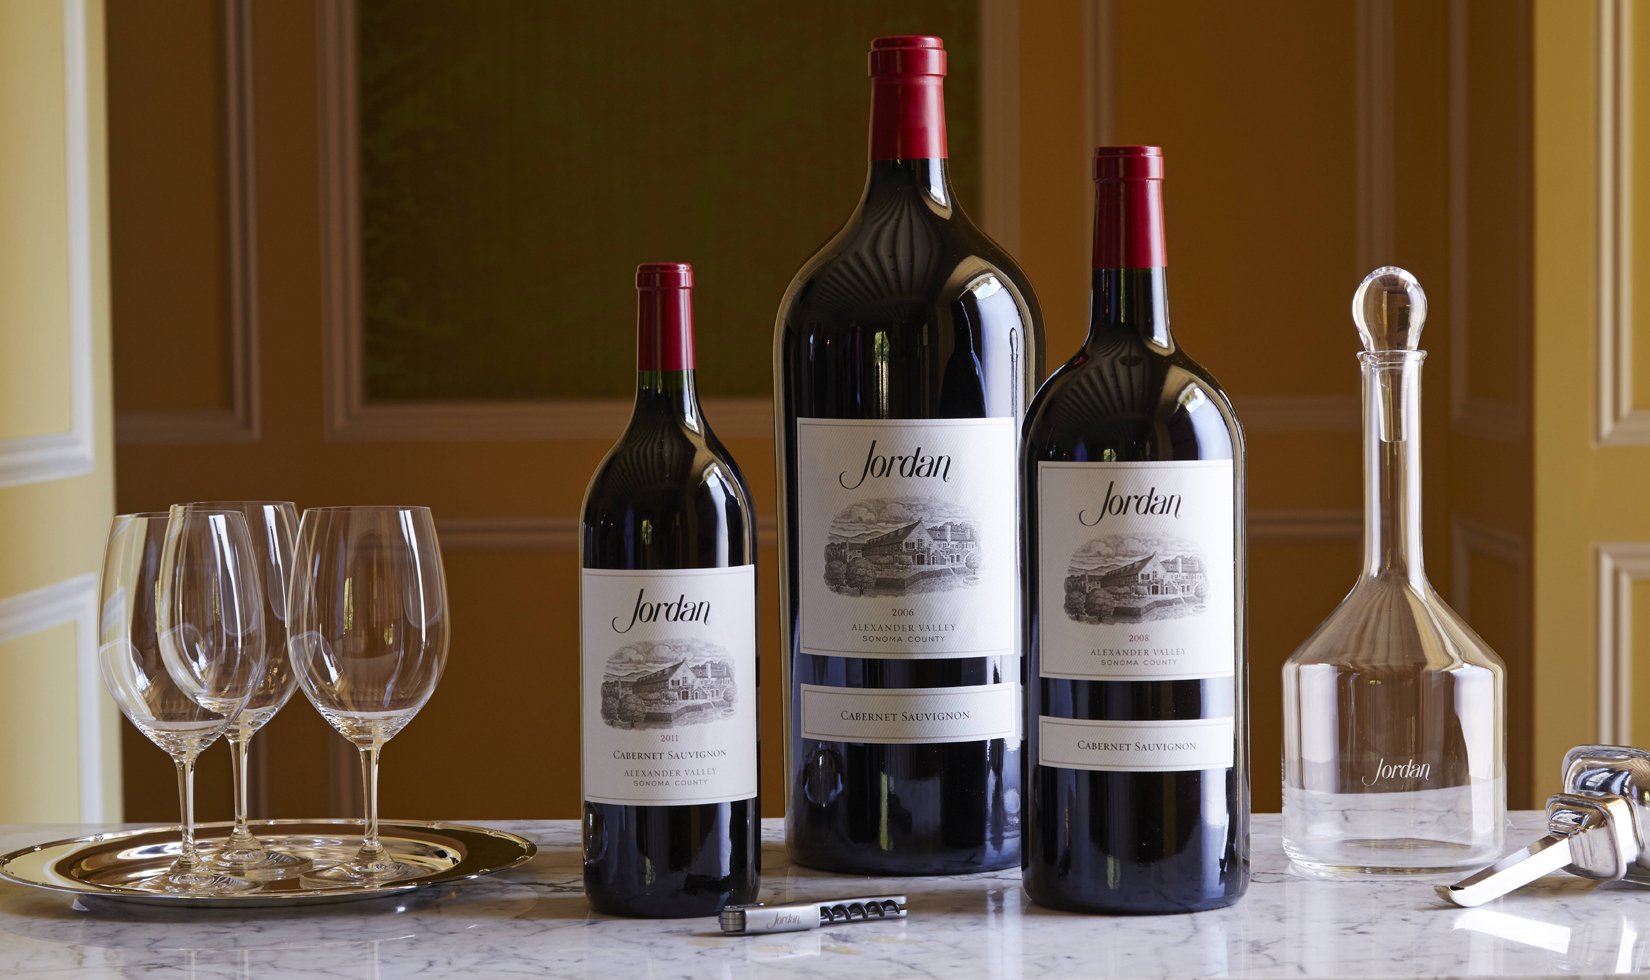 3 different sizes of wine bottles from Jordan Winery. 